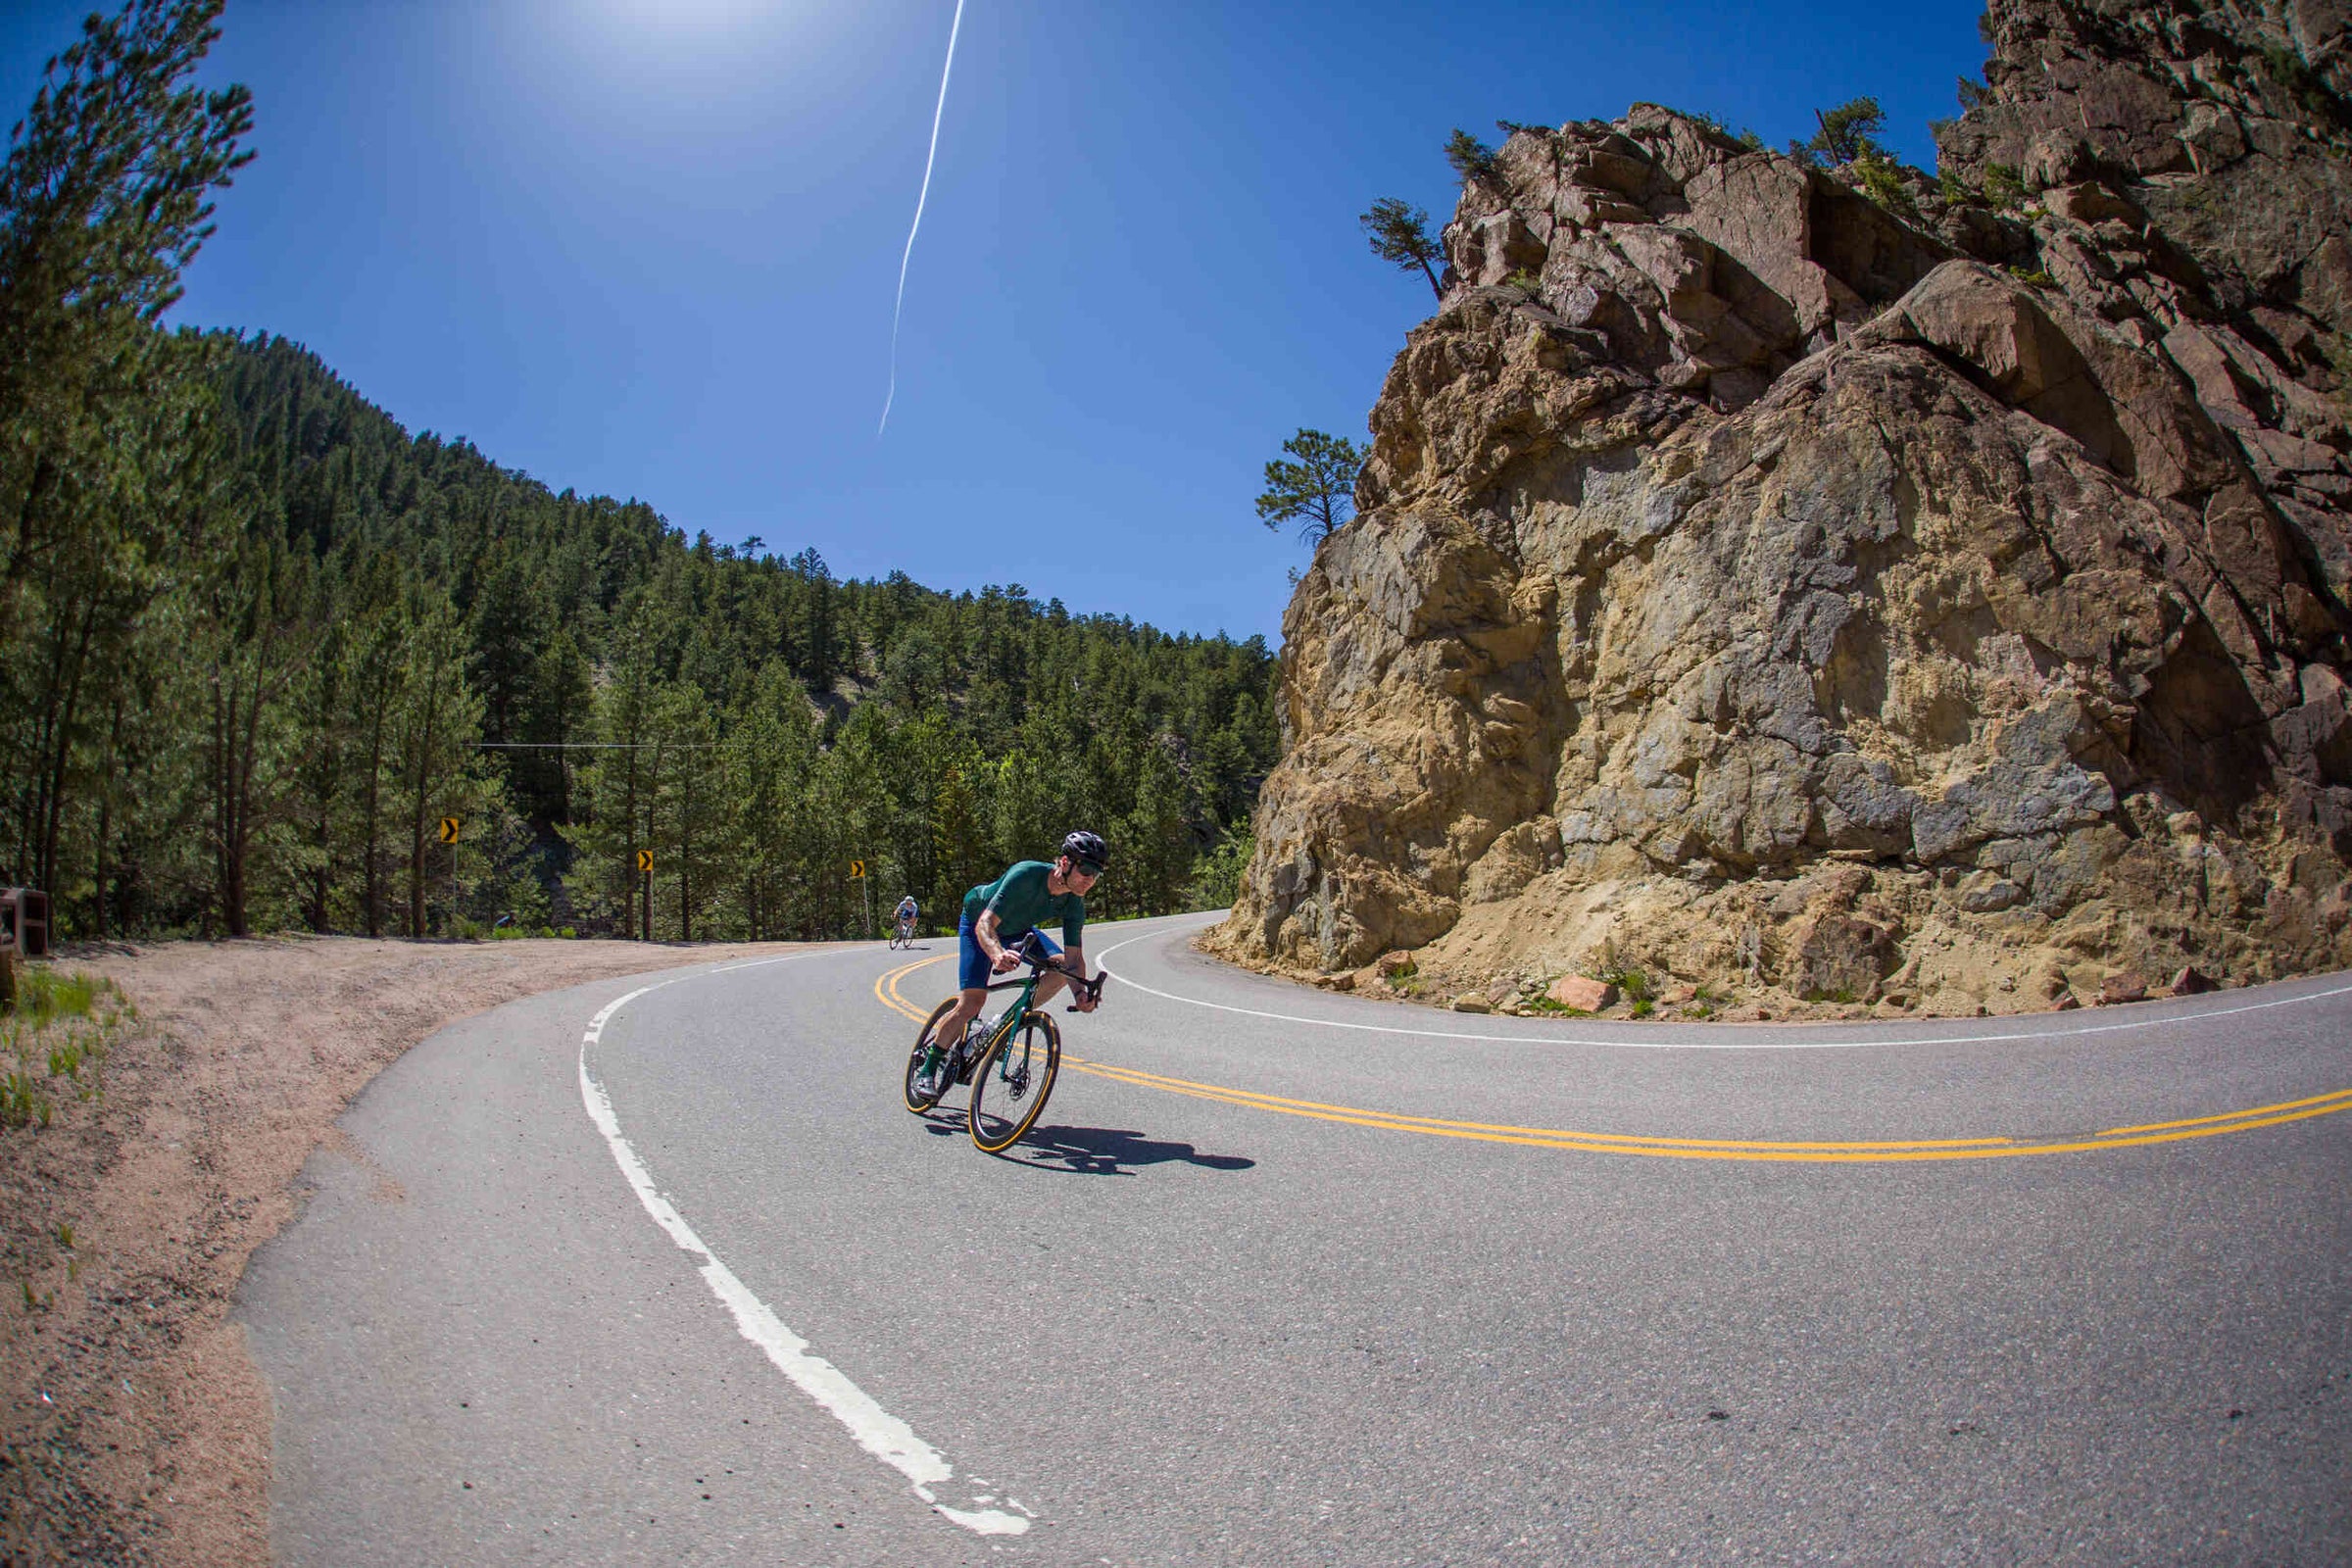 11 Cycling Tips for Descending Safer and Faster